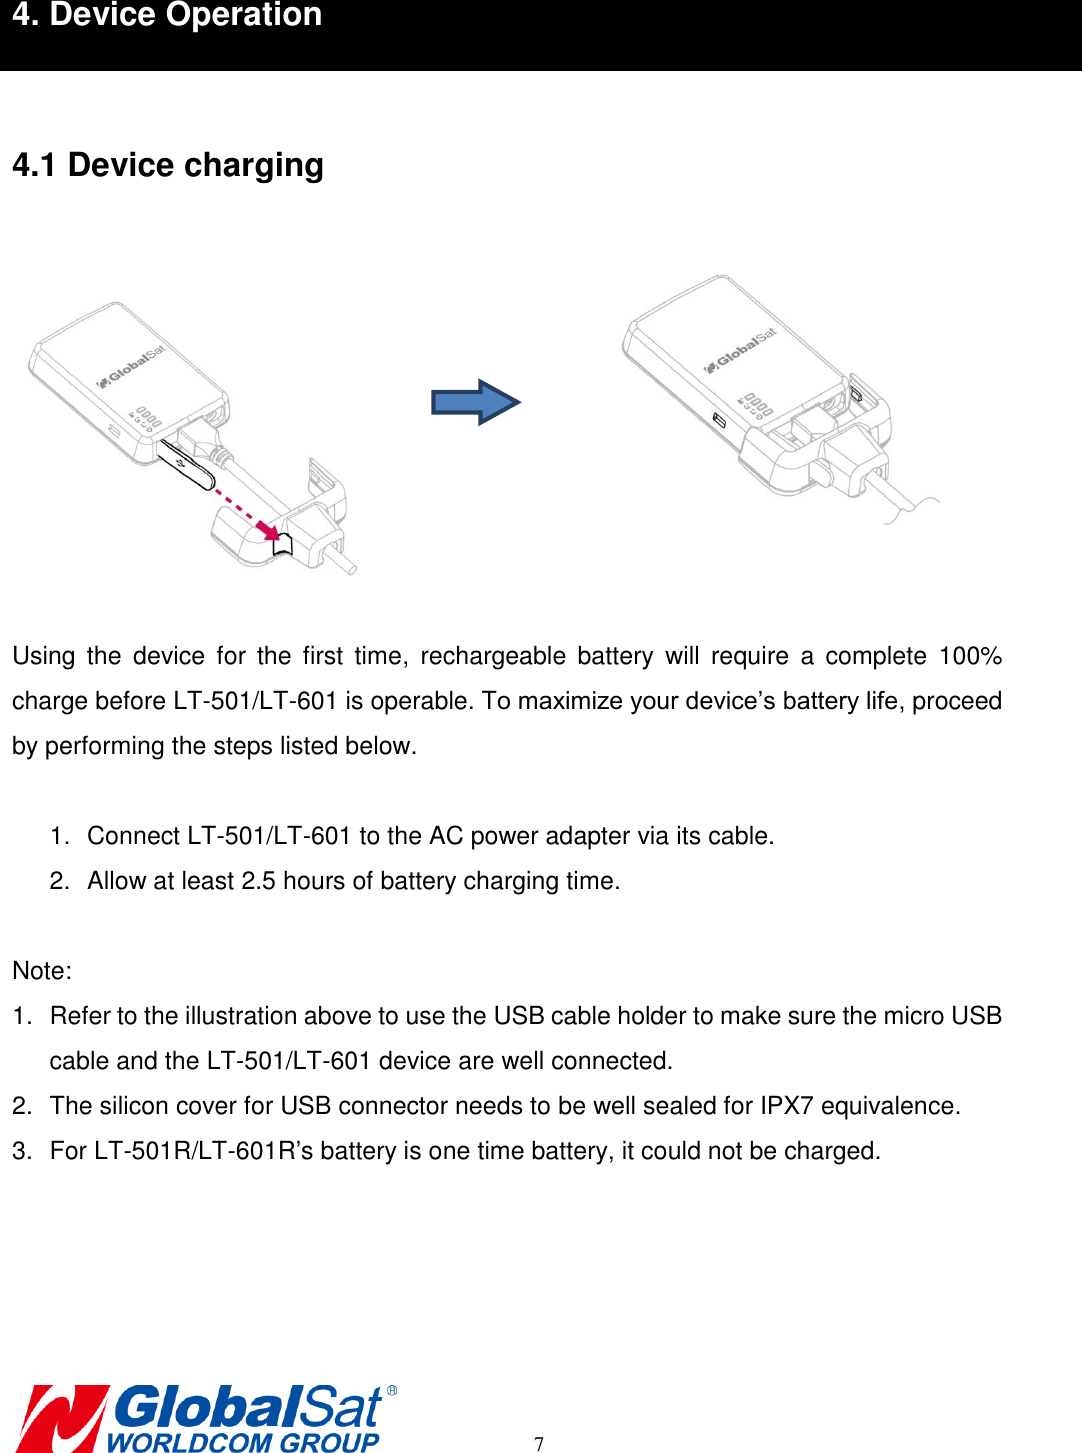       7 4. Device Operation  4.1 Device charging   Using  the  device  for  the  first  time,  rechargeable  battery  will  require  a  complete  100% charge before LT-501/LT-601 is operable. To maximize your device’s battery life, proceed by performing the steps listed below.  1.  Connect LT-501/LT-601 to the AC power adapter via its cable.   2.  Allow at least 2.5 hours of battery charging time.  Note:   1.  Refer to the illustration above to use the USB cable holder to make sure the micro USB cable and the LT-501/LT-601 device are well connected. 2.  The silicon cover for USB connector needs to be well sealed for IPX7 equivalence. 3.  For LT-501R/LT-601R’s battery is one time battery, it could not be charged.     